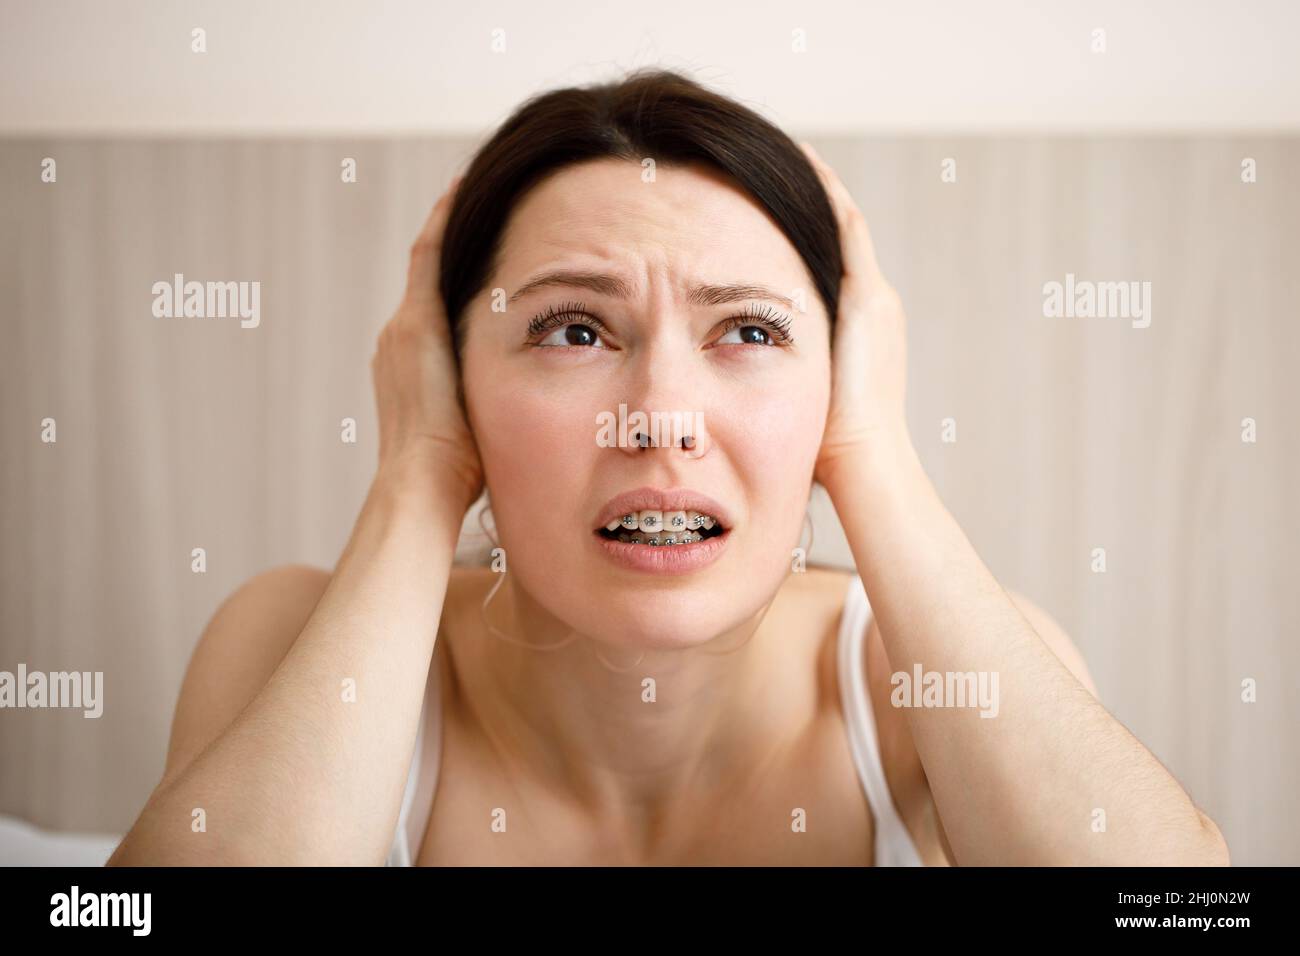 The woman covers her ears because of the loud noise. Noisy neighbors listen to loud music and interfere with sleep. Using earplugs. Stock Photo